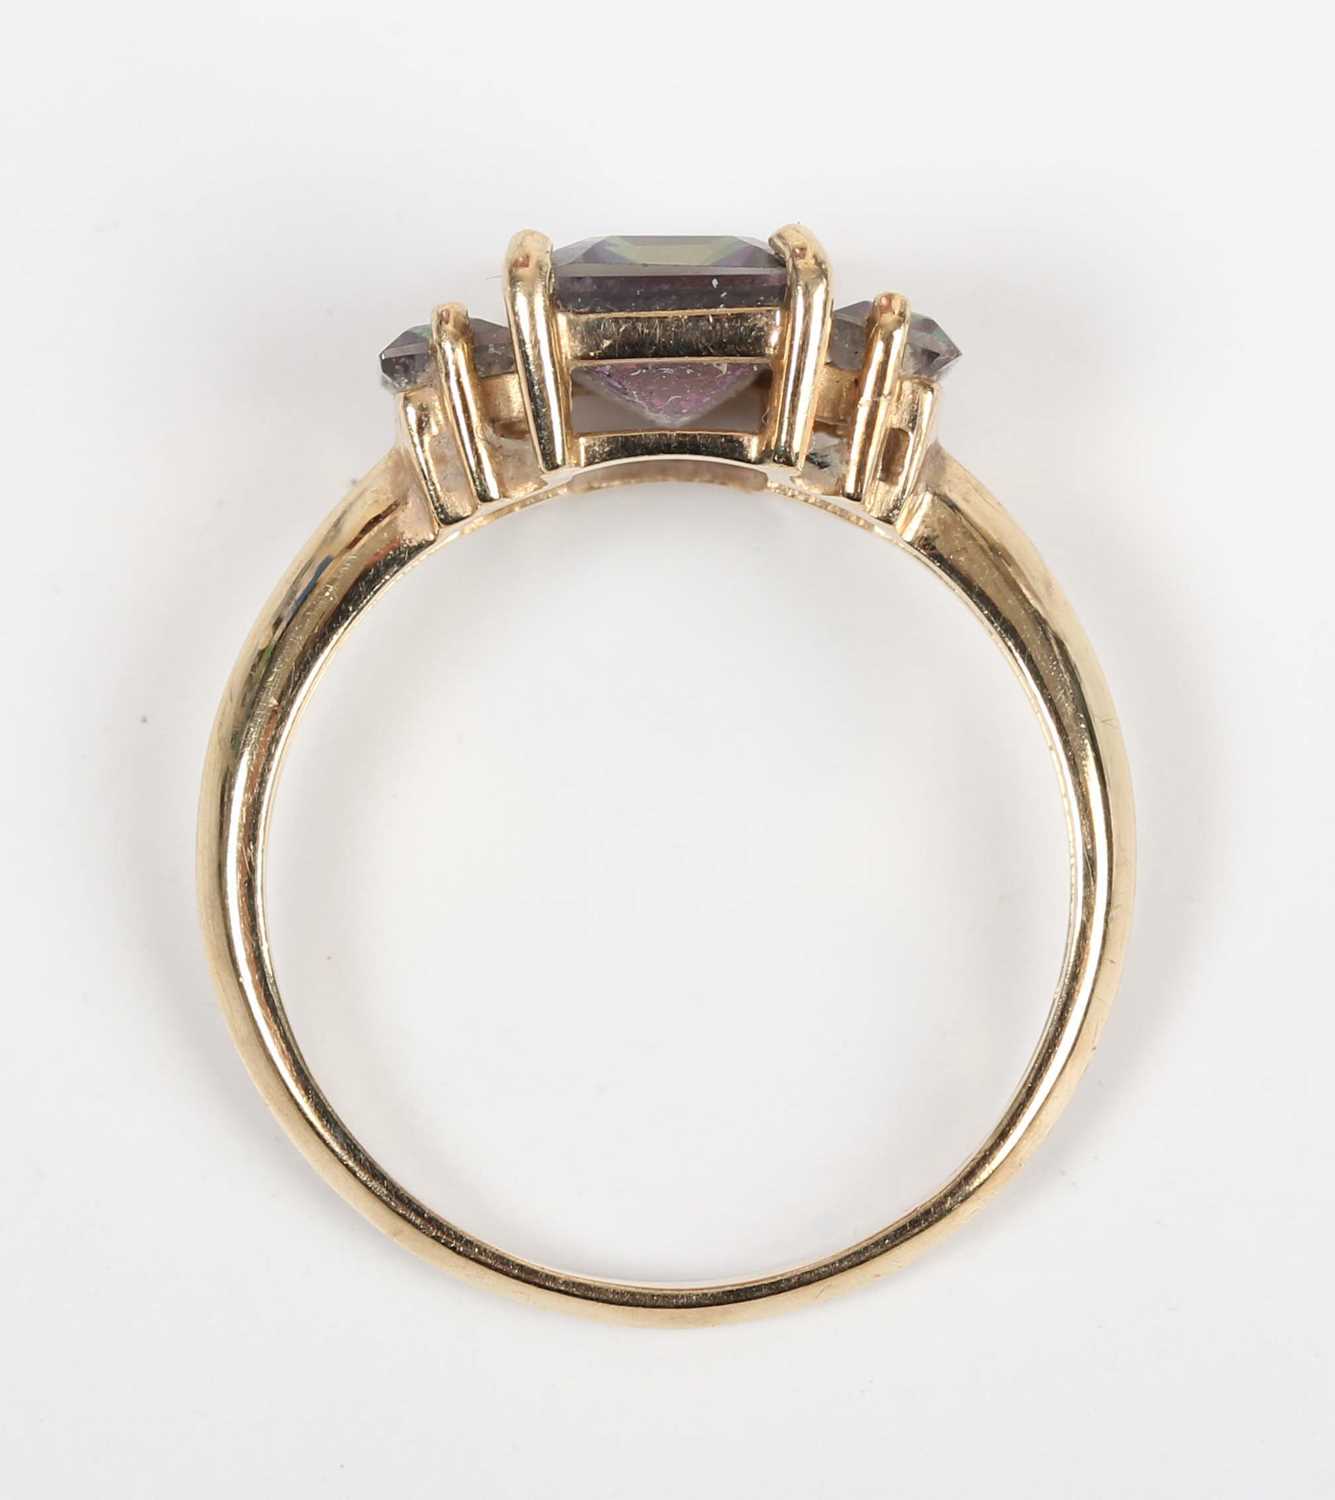 A 9ct gold ring, mounted with a cut cornered rectangular step cut mystic topaz between two smaller - Image 4 of 5